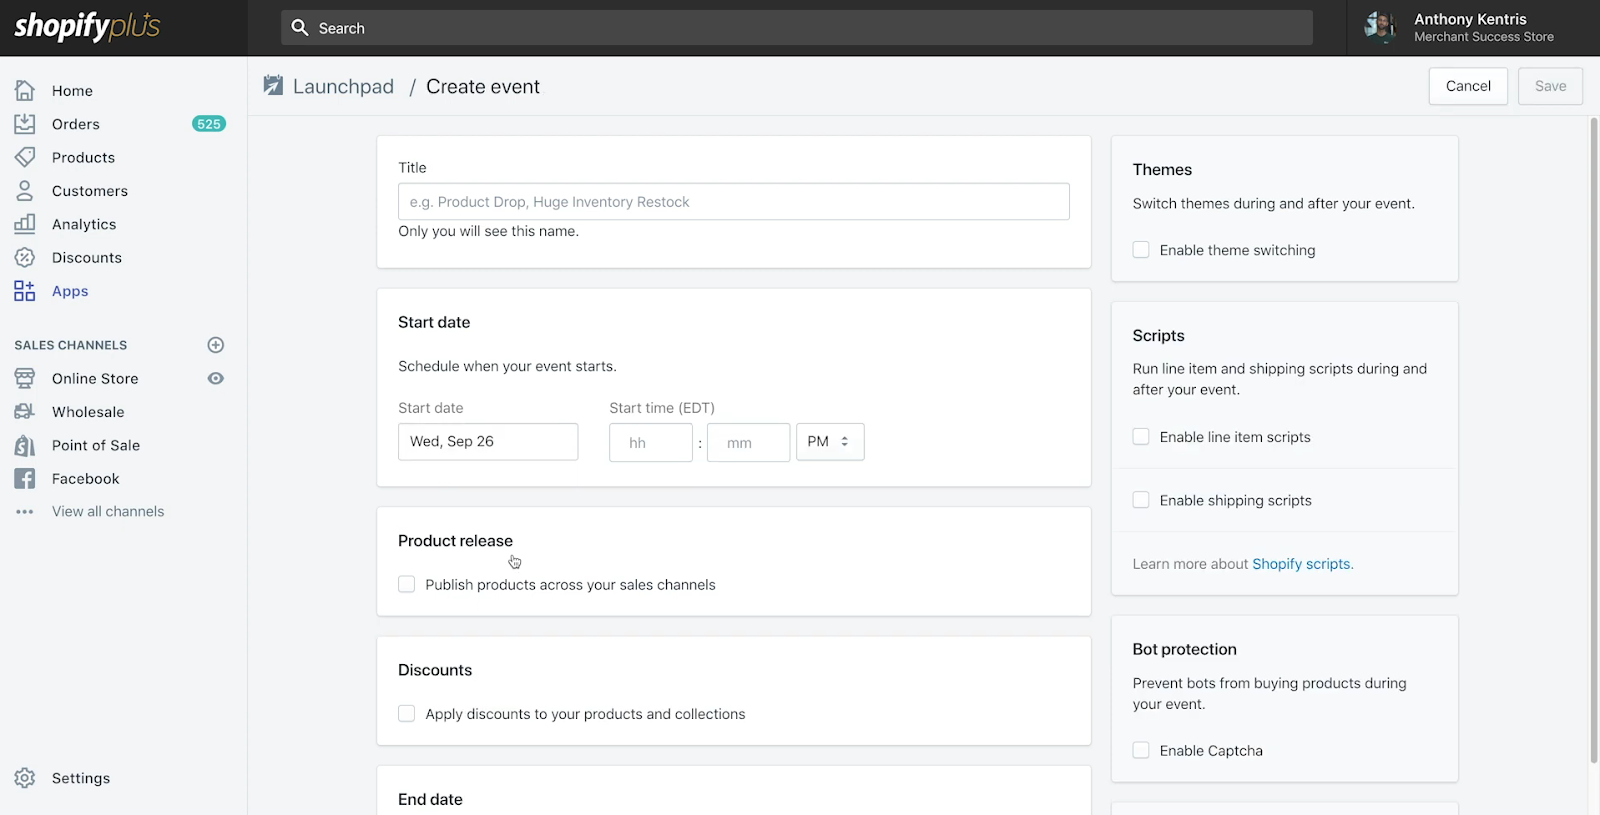 A screenshot showing how to set up an event in Shopify Launchpad